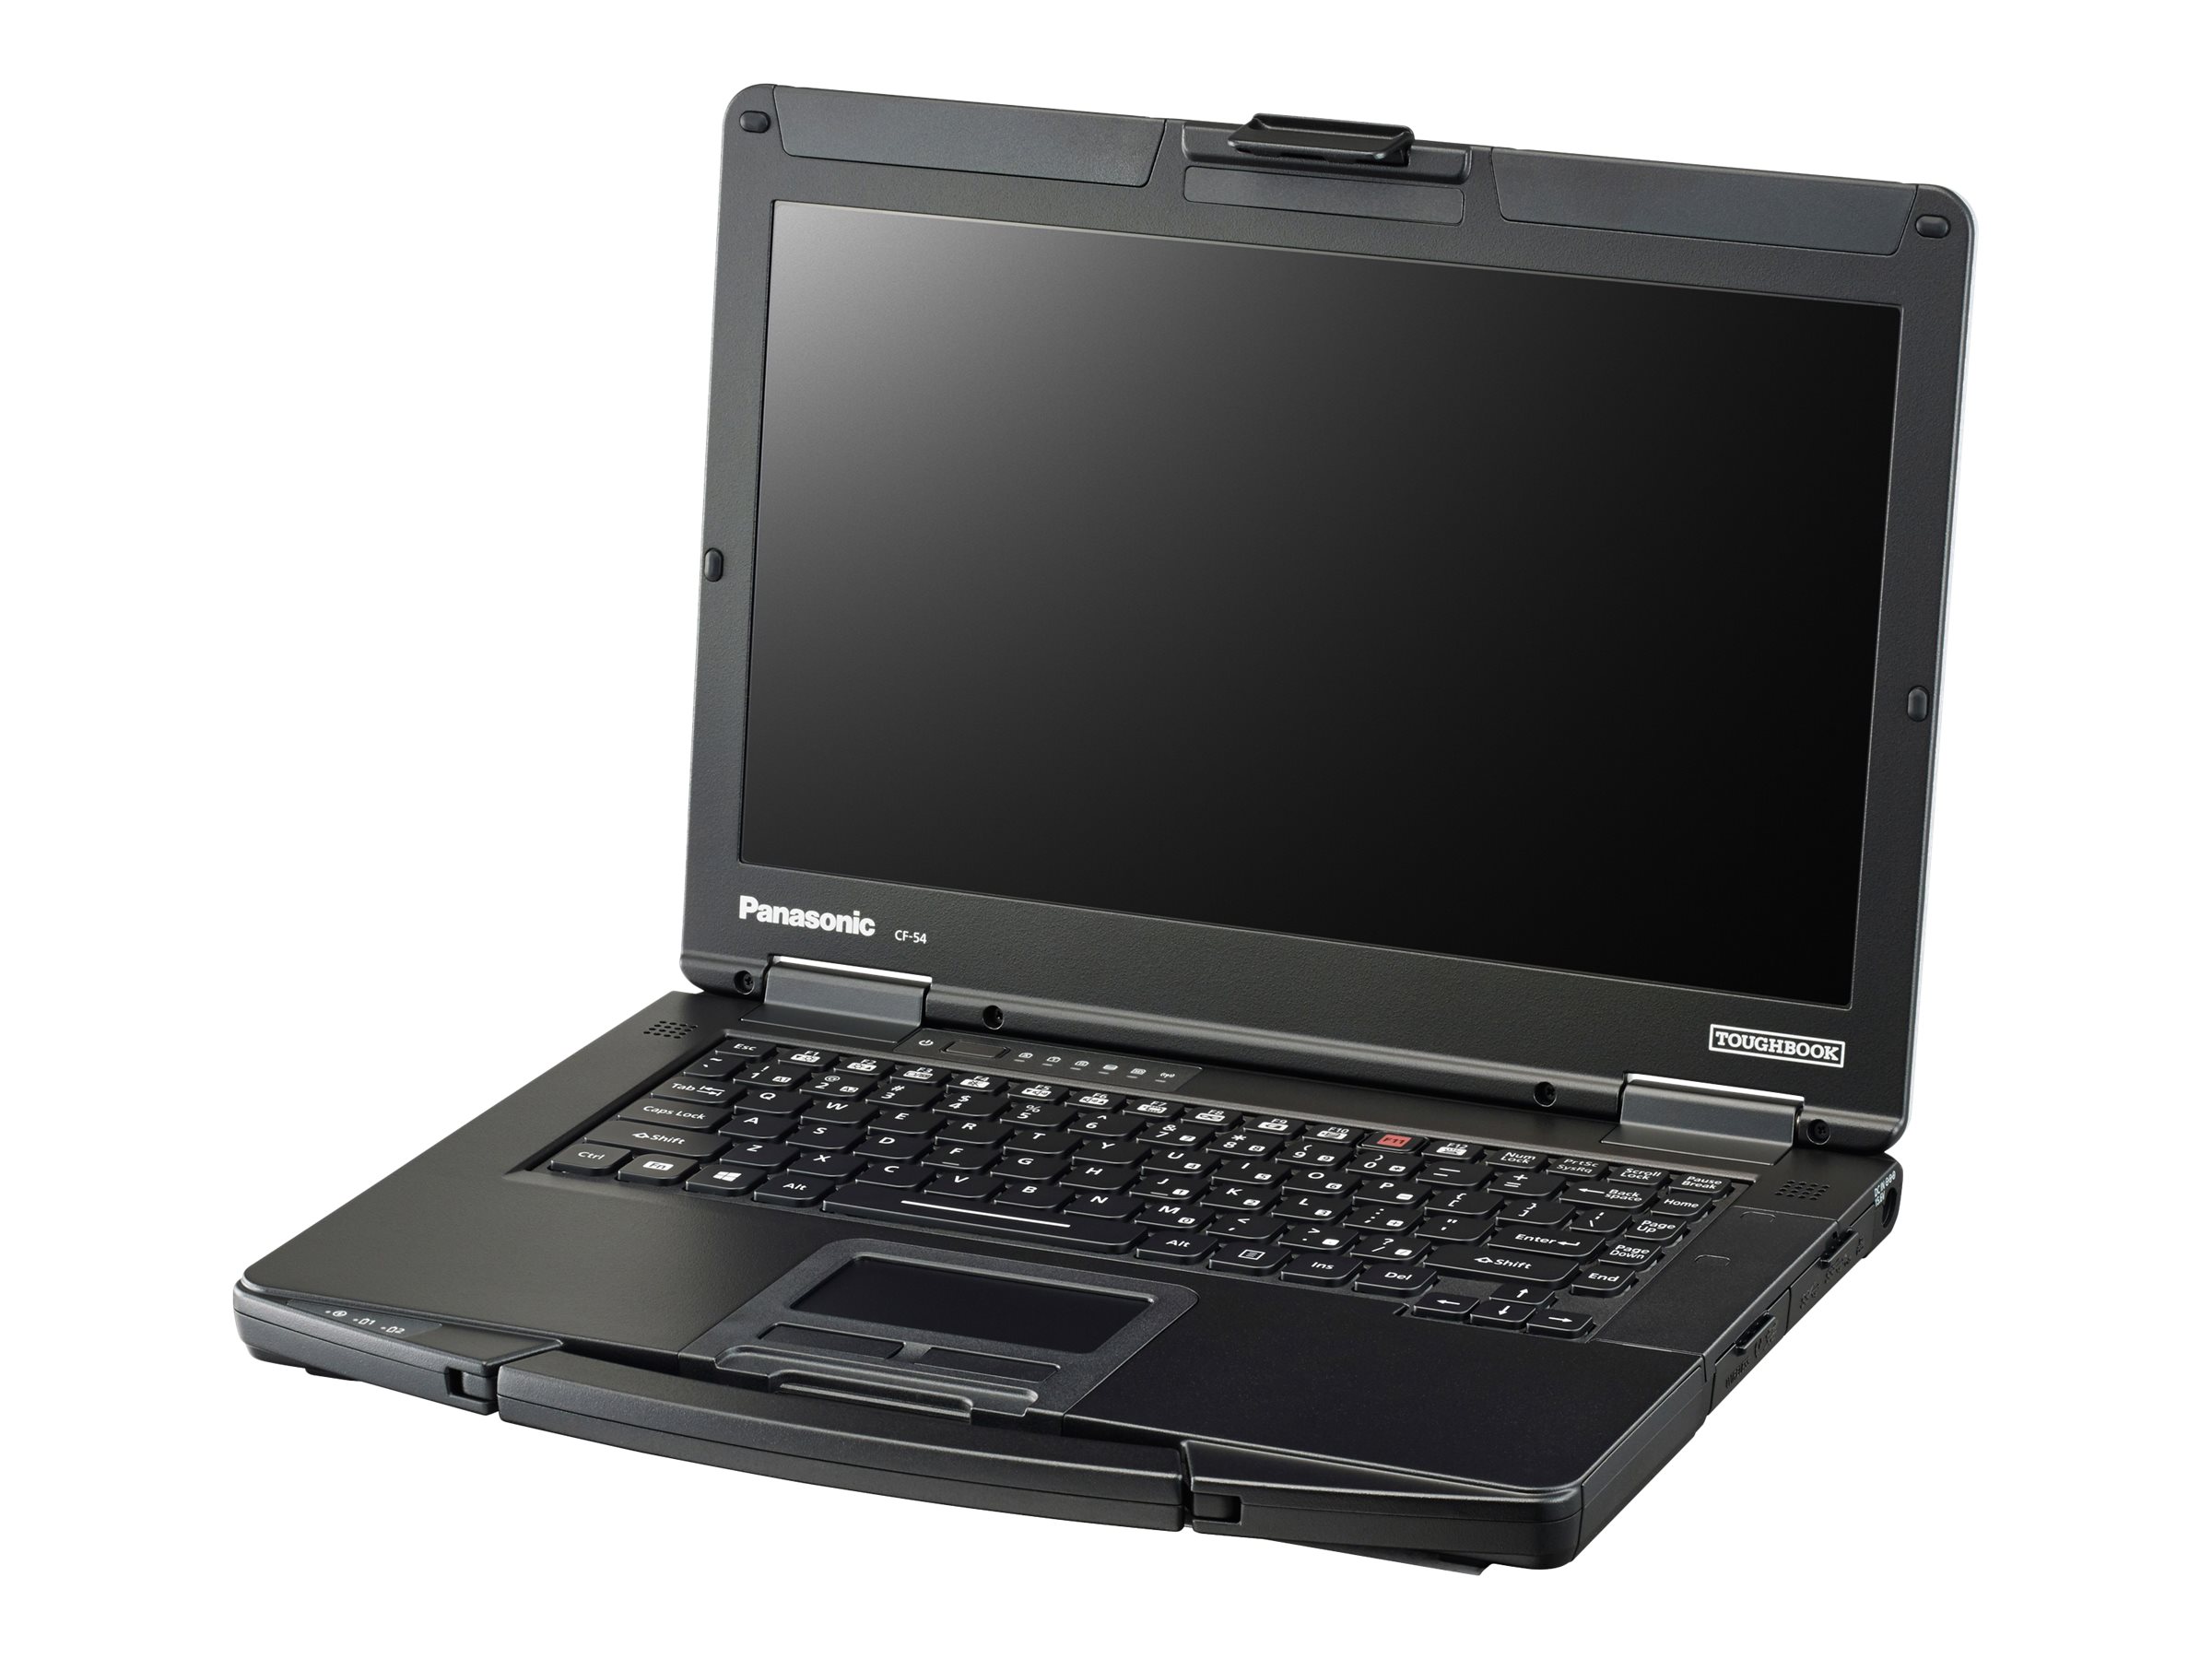 Panasonic Toughbook 54 Prime - Intel Core i5 - 7300U / up to 3.5 GHz - vPro - Win 10 Pro - HD Graphics 620 - 8 GB RAM - 256 GB SSD - DVD SuperMulti - 14" 1366 x 768 (HD) - Wi-Fi 5 - 4G LTE - with Toughbook Preferred - image 1 of 6